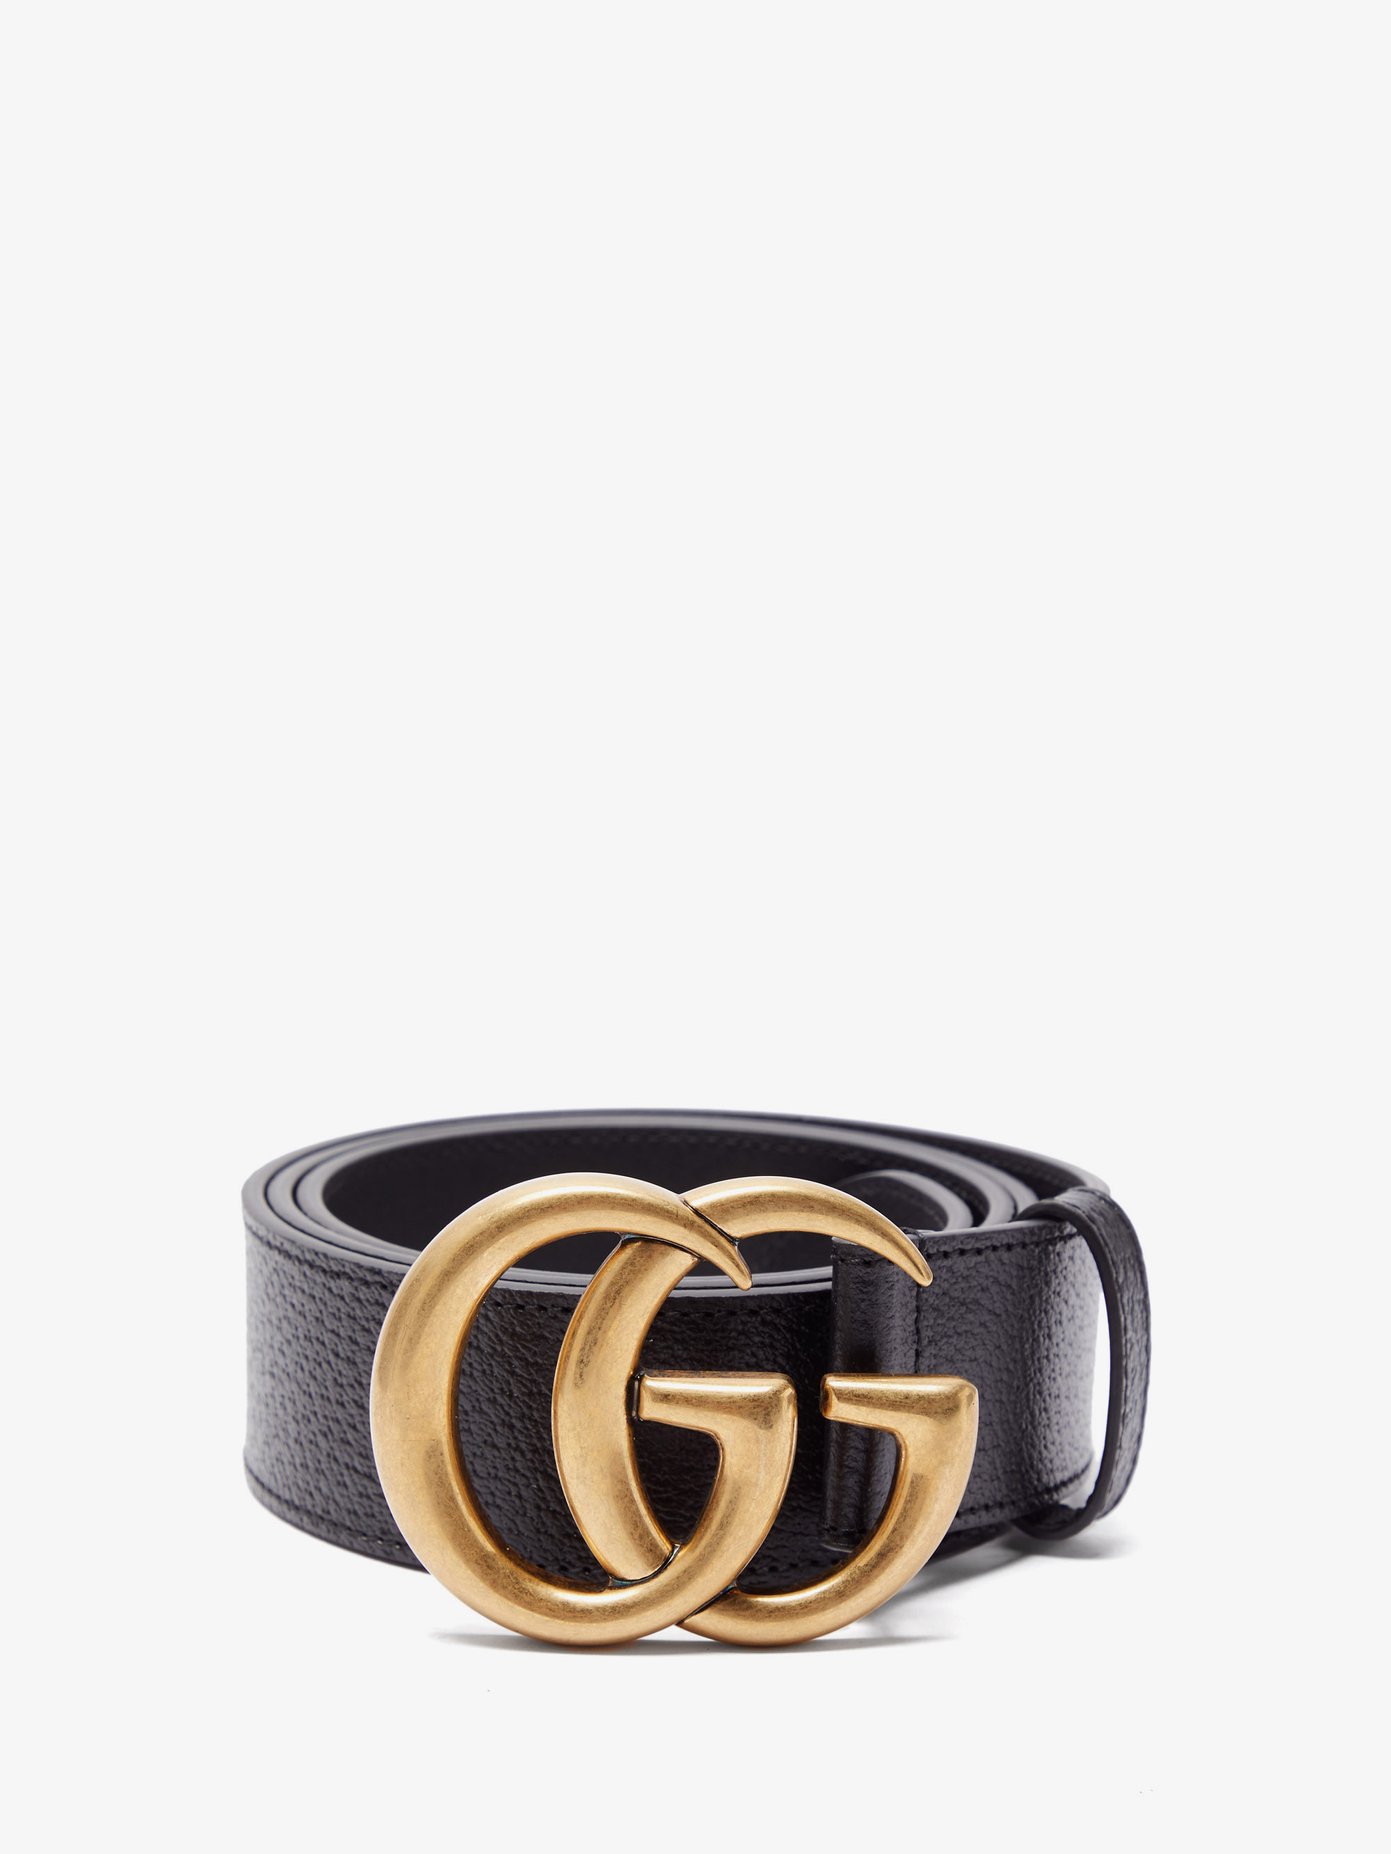 GG textured-leather belt | Gucci 